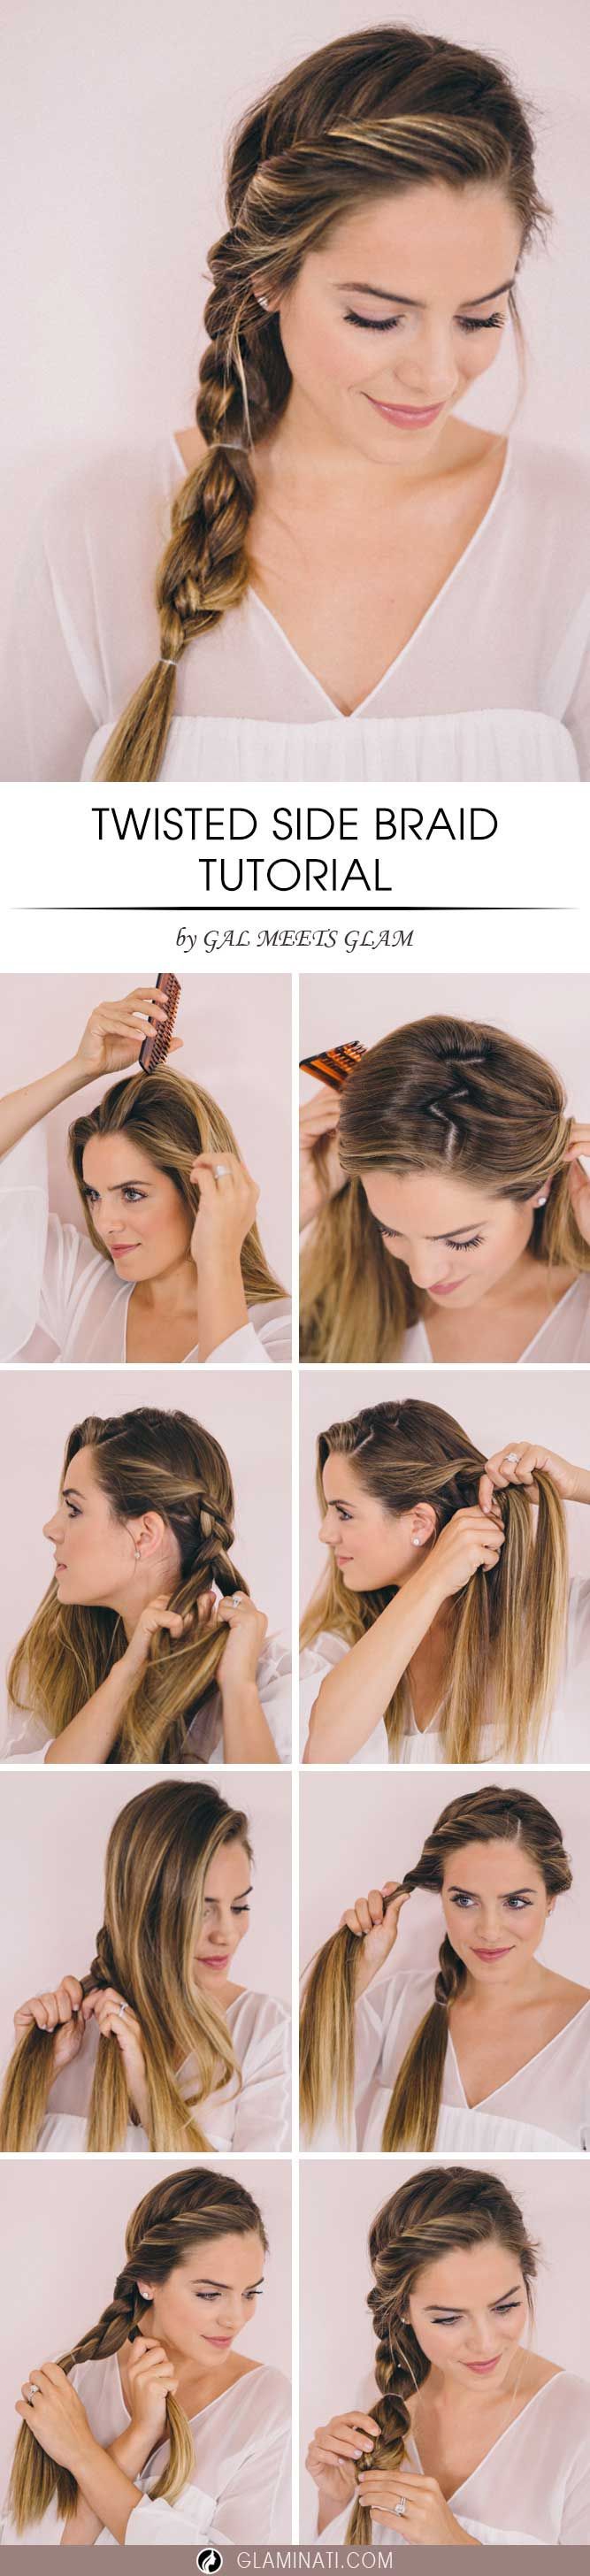 A side braid is trendy right now. It is perfect for everyday wear and some fancy parties. A twisted braid looks terrific with